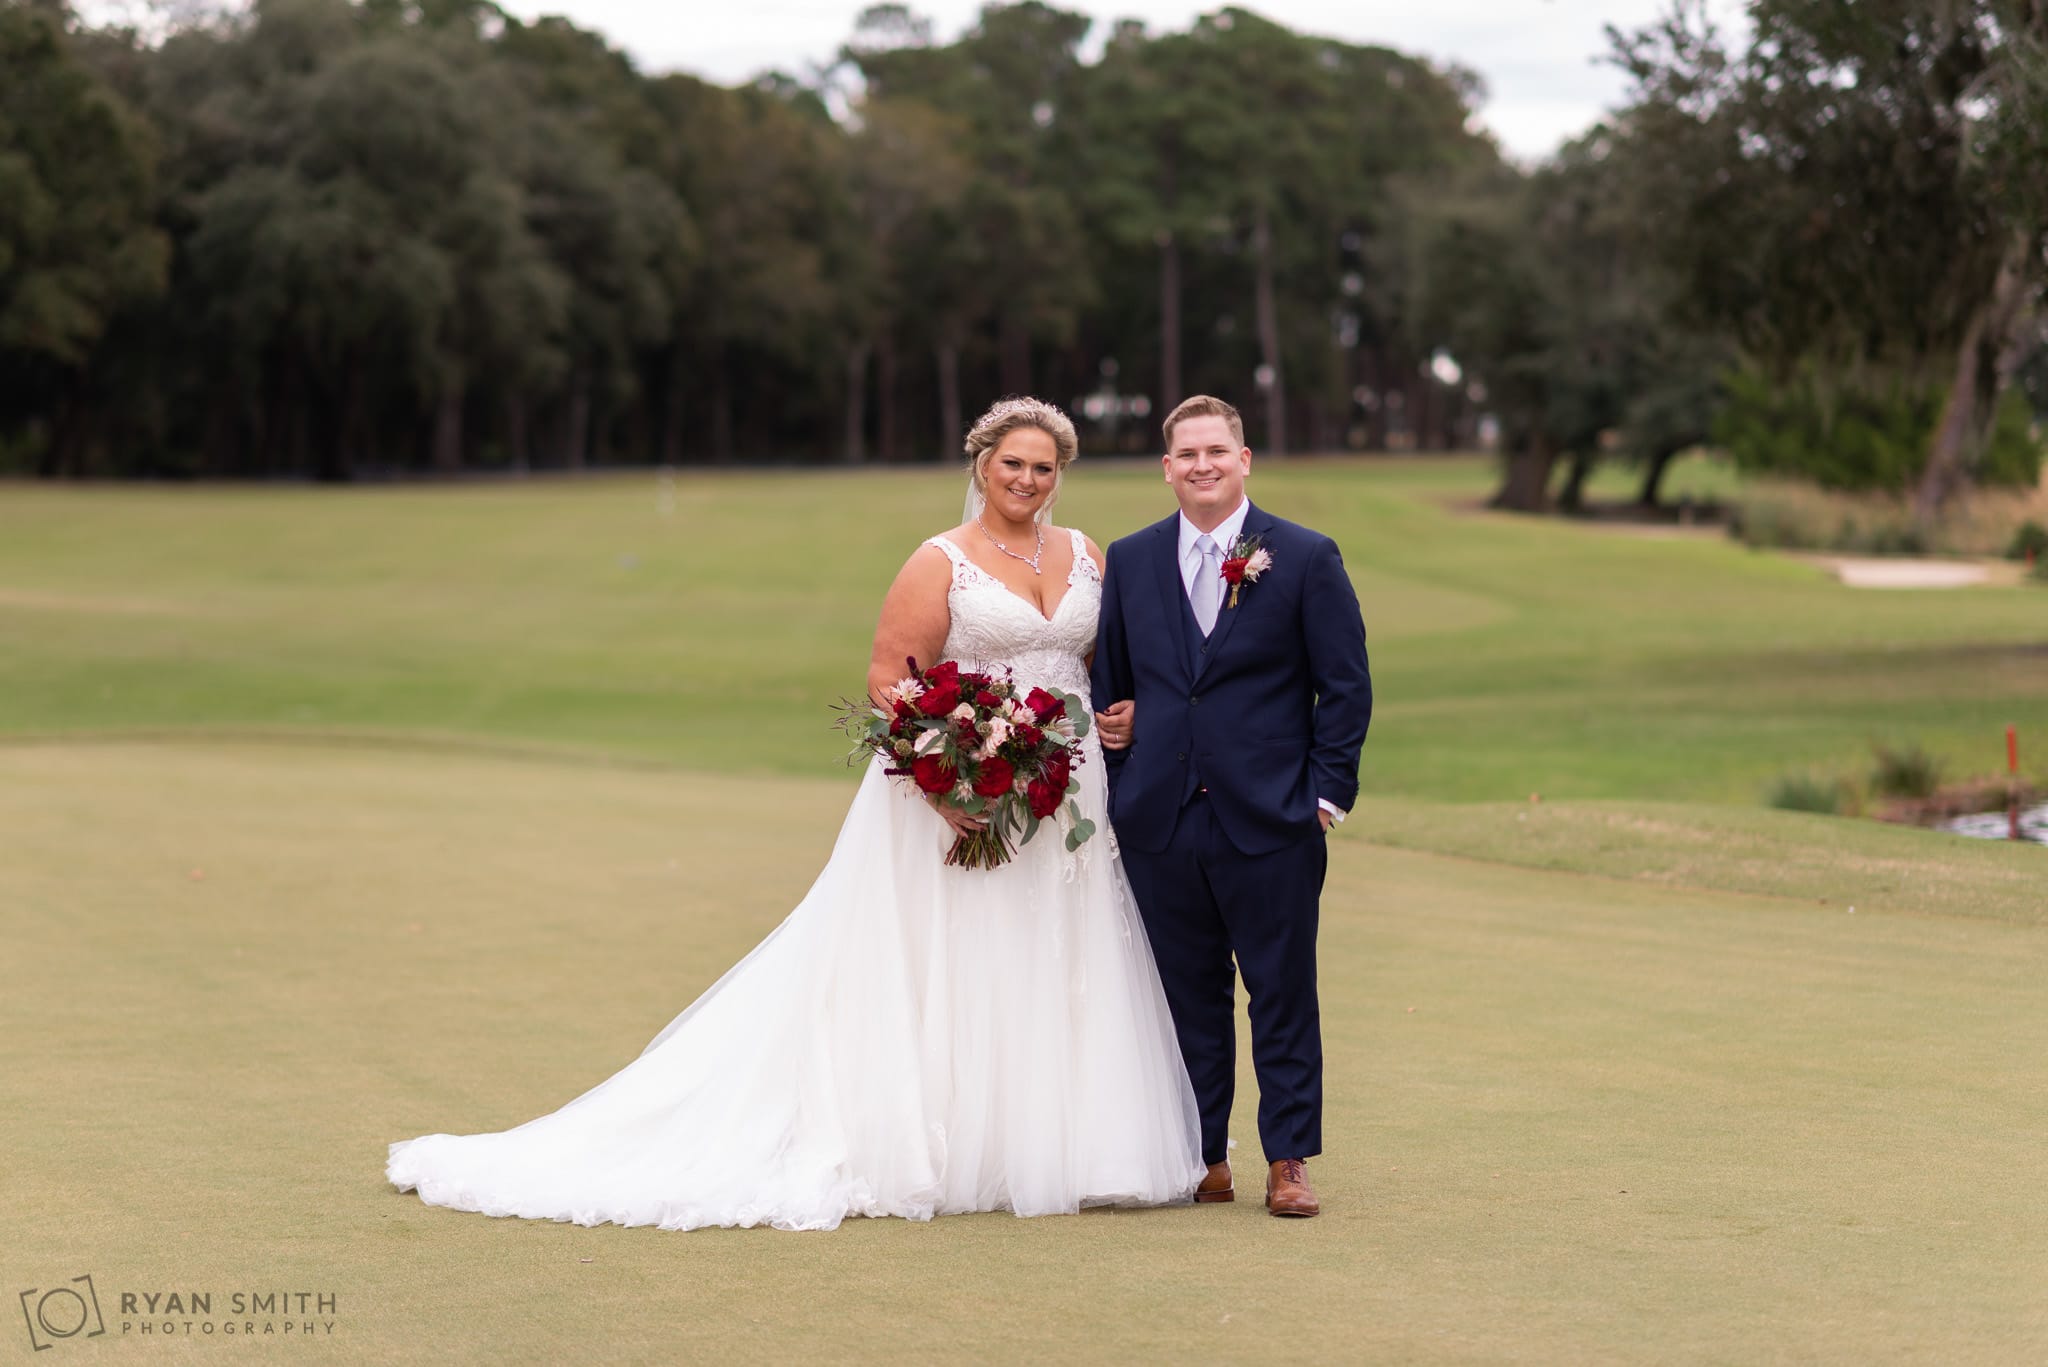 Bride and groom standing on the golf course